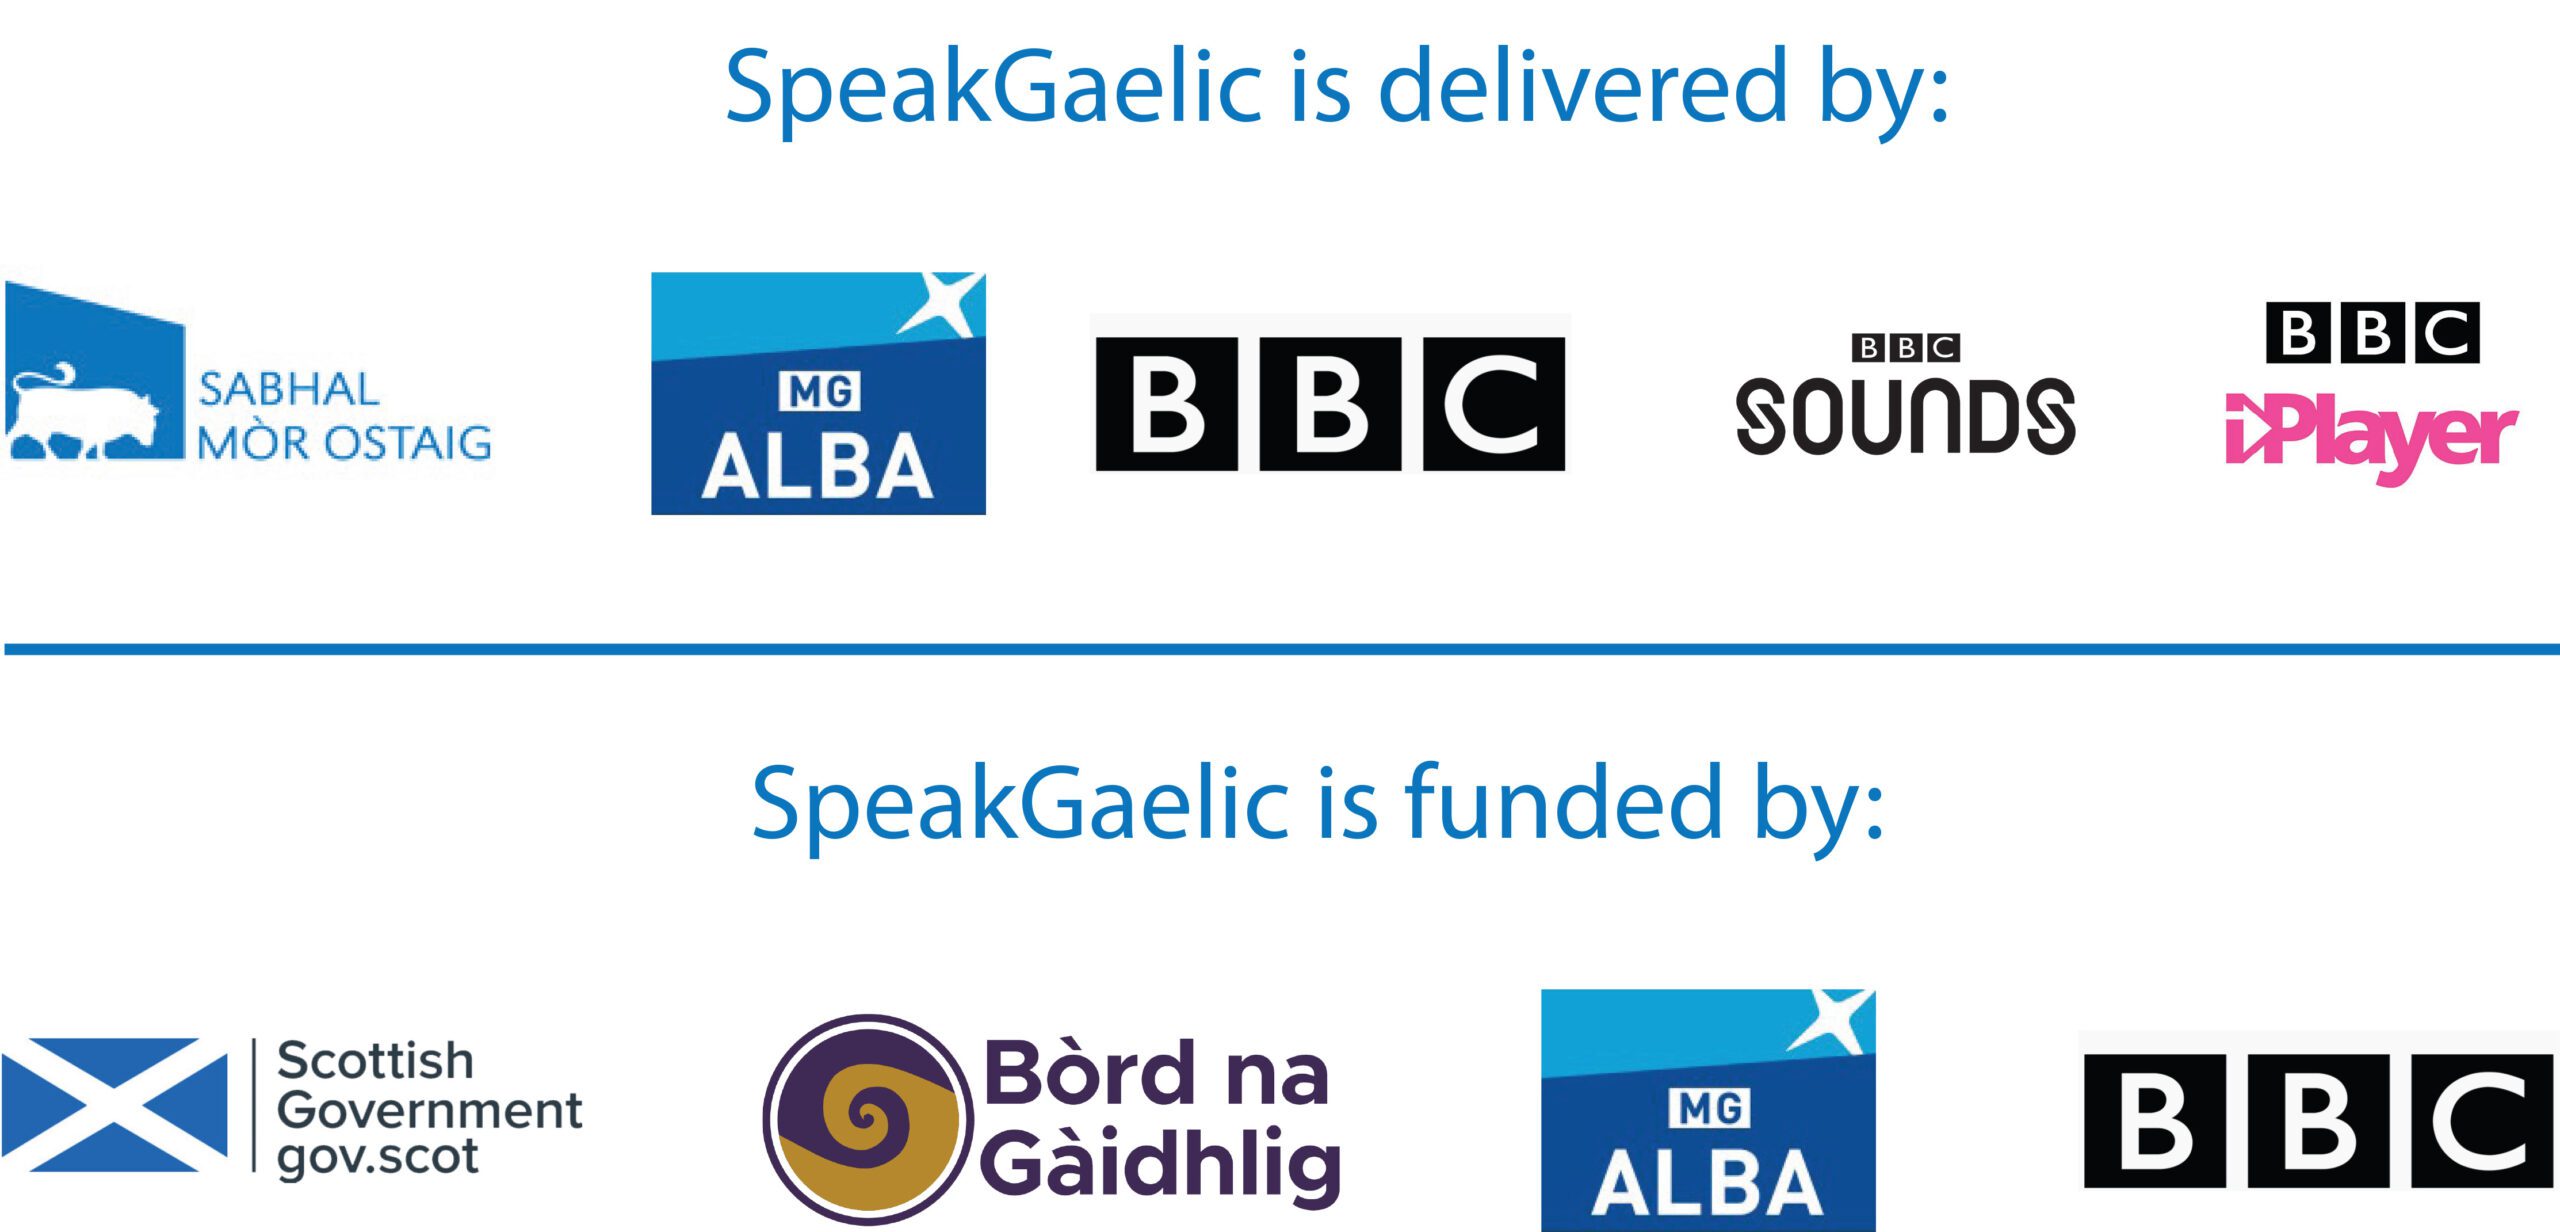 SpeakGaelic is delivered and funded by